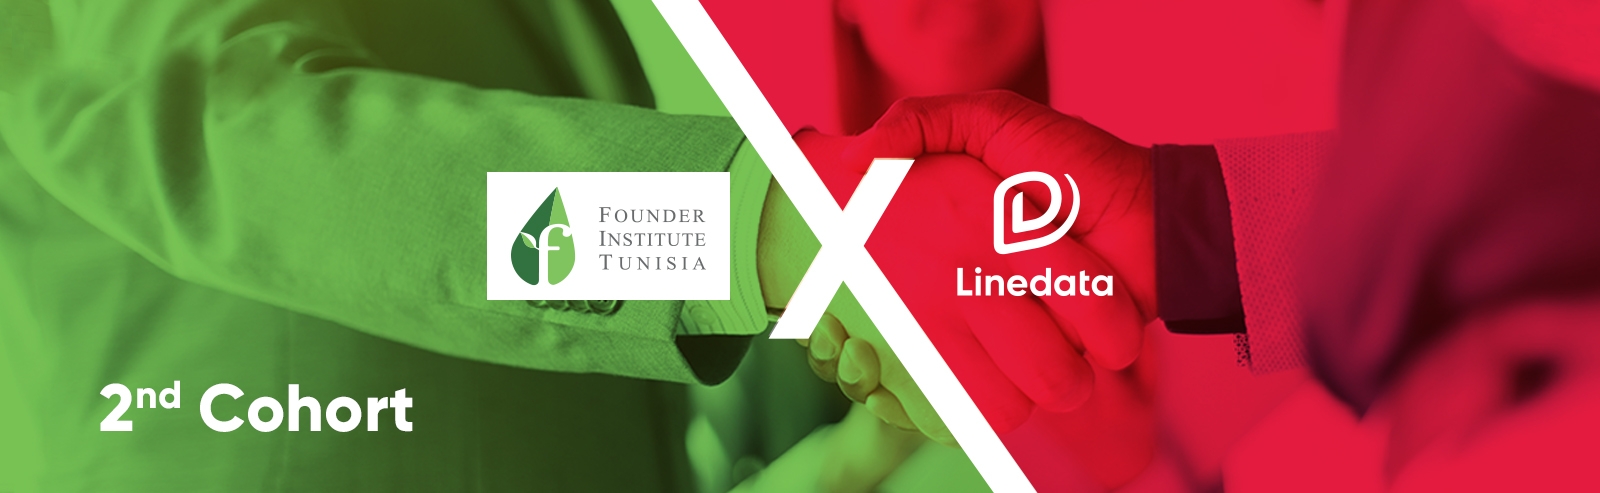 Founder Institute first cohort - two of Linedata's employees involved